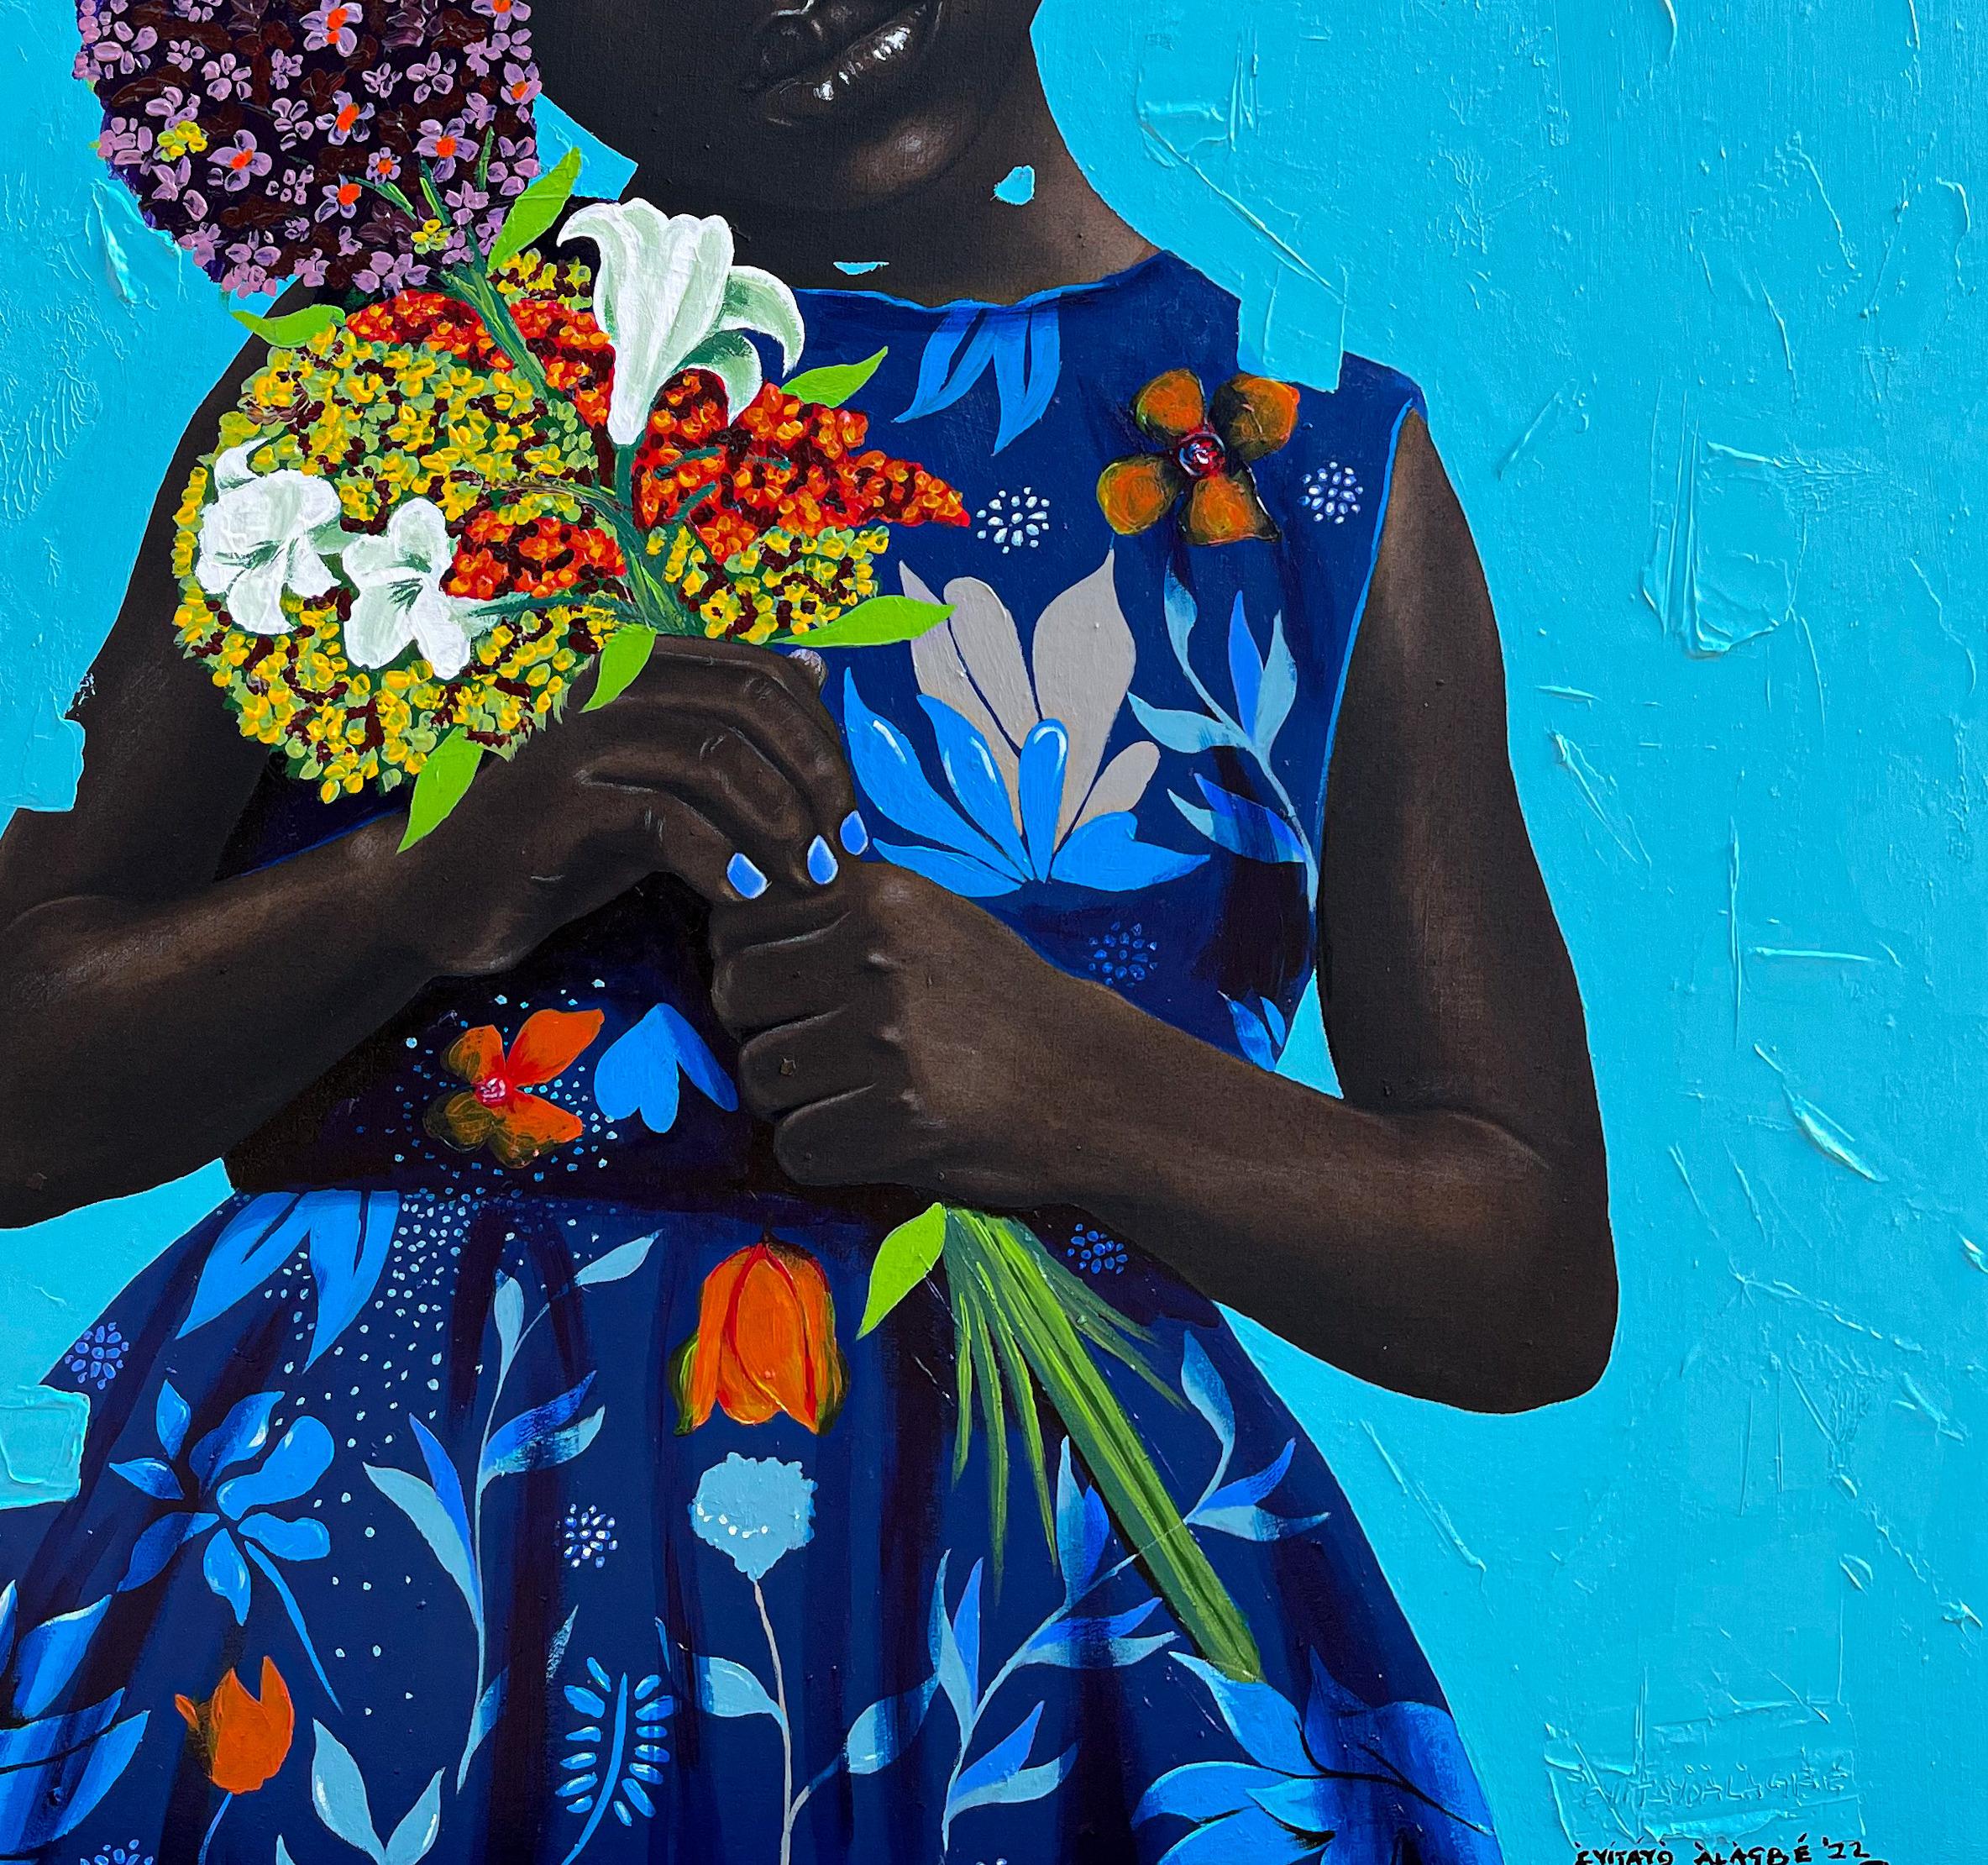 Give Us Our Flowers - Expressionist Mixed Media Art by Eyitayo Alagbe 